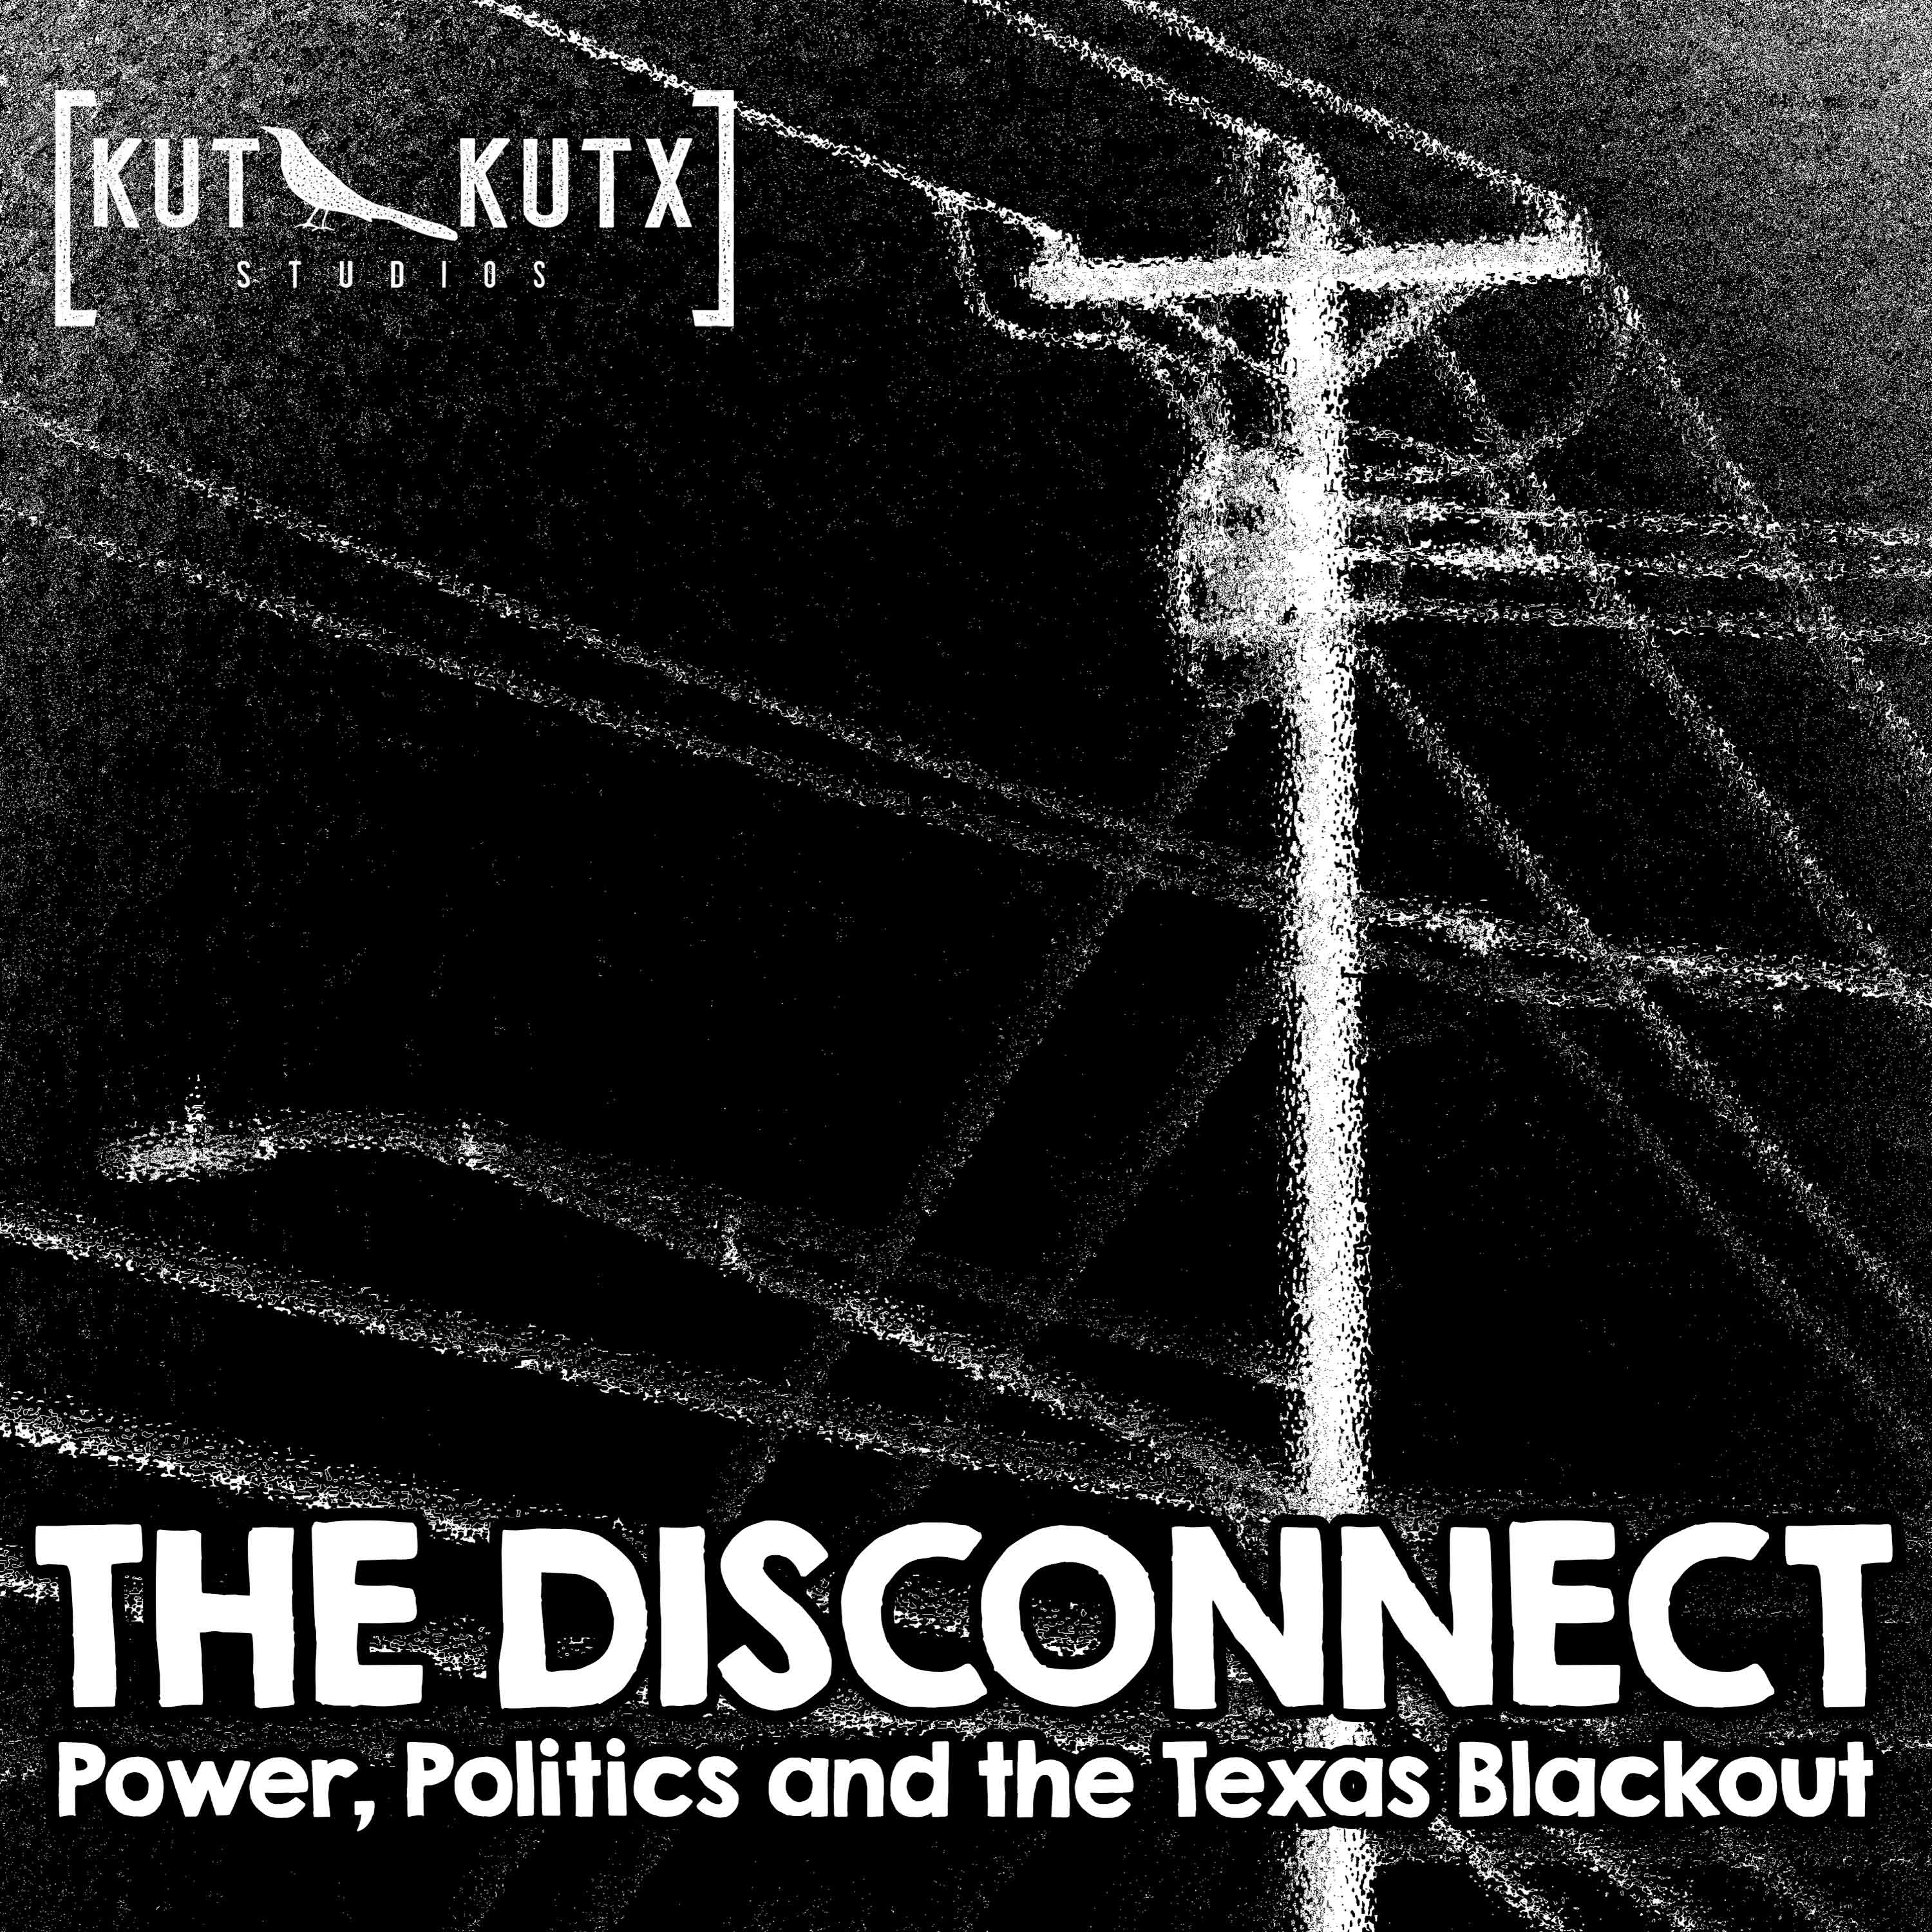 Tracking the True Toll of the Texas Blackout